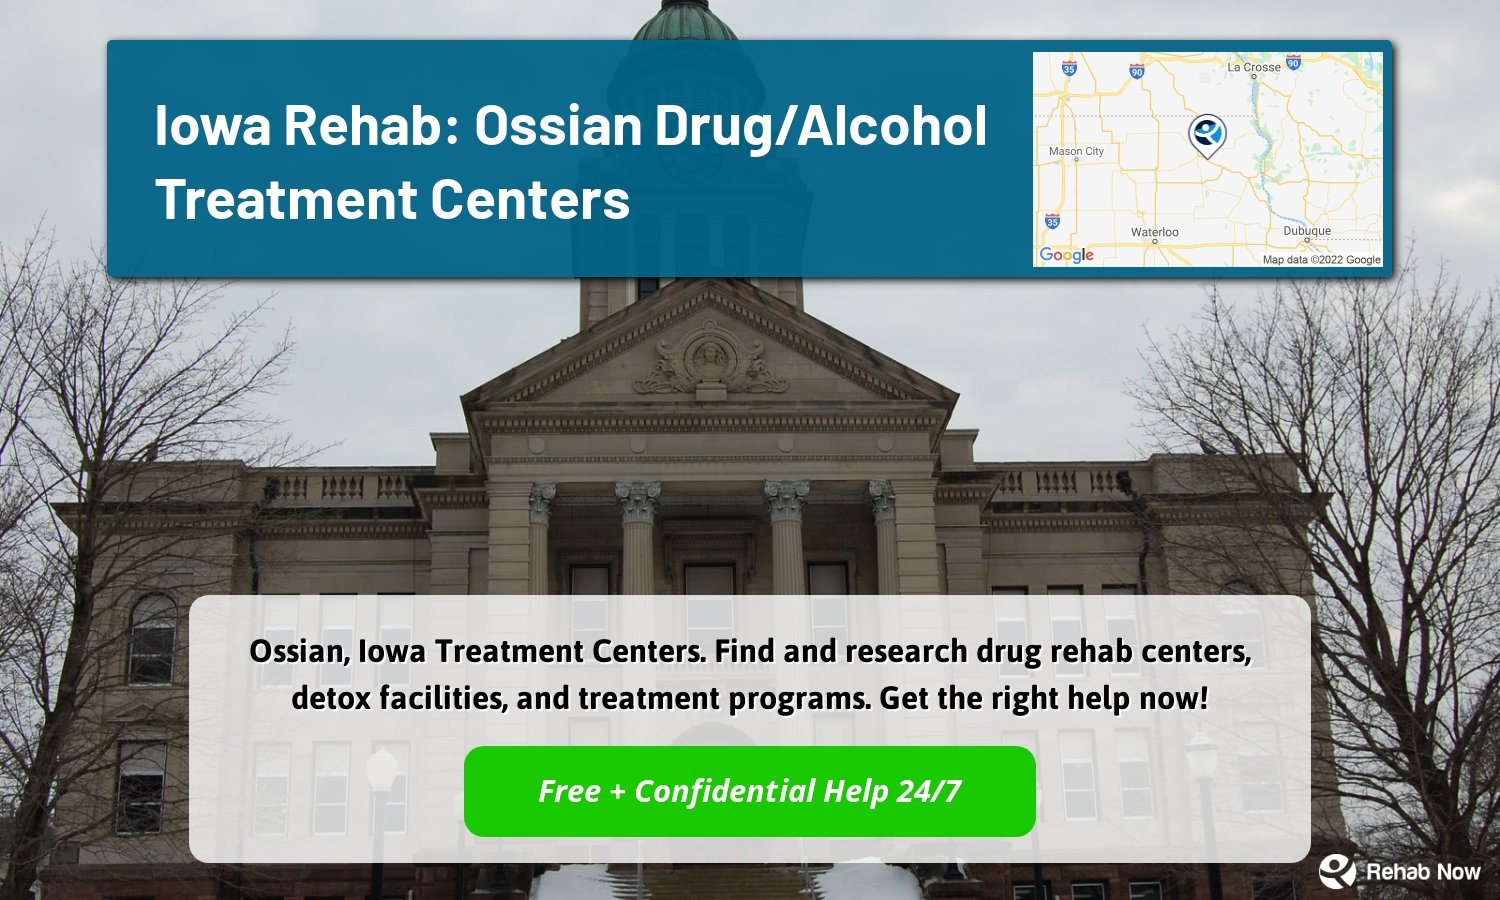 Ossian, Iowa Treatment Centers. Find and research drug rehab centers, detox facilities, and treatment programs. Get the right help now!